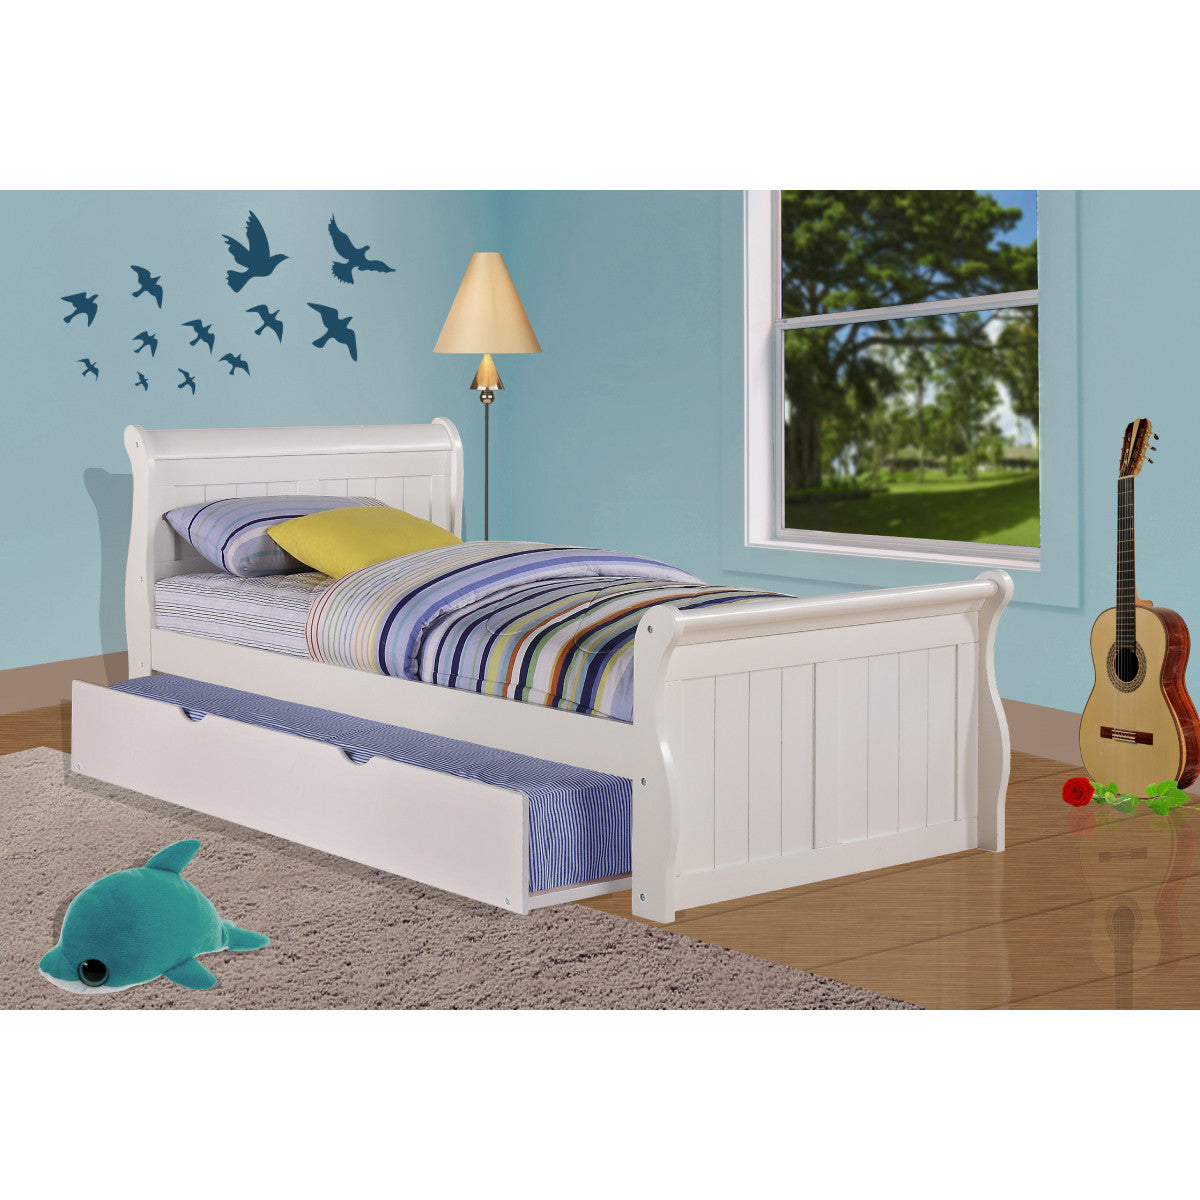 TWIN SLEIGH BED WITH TRUNDLE BED WHITE FINISH